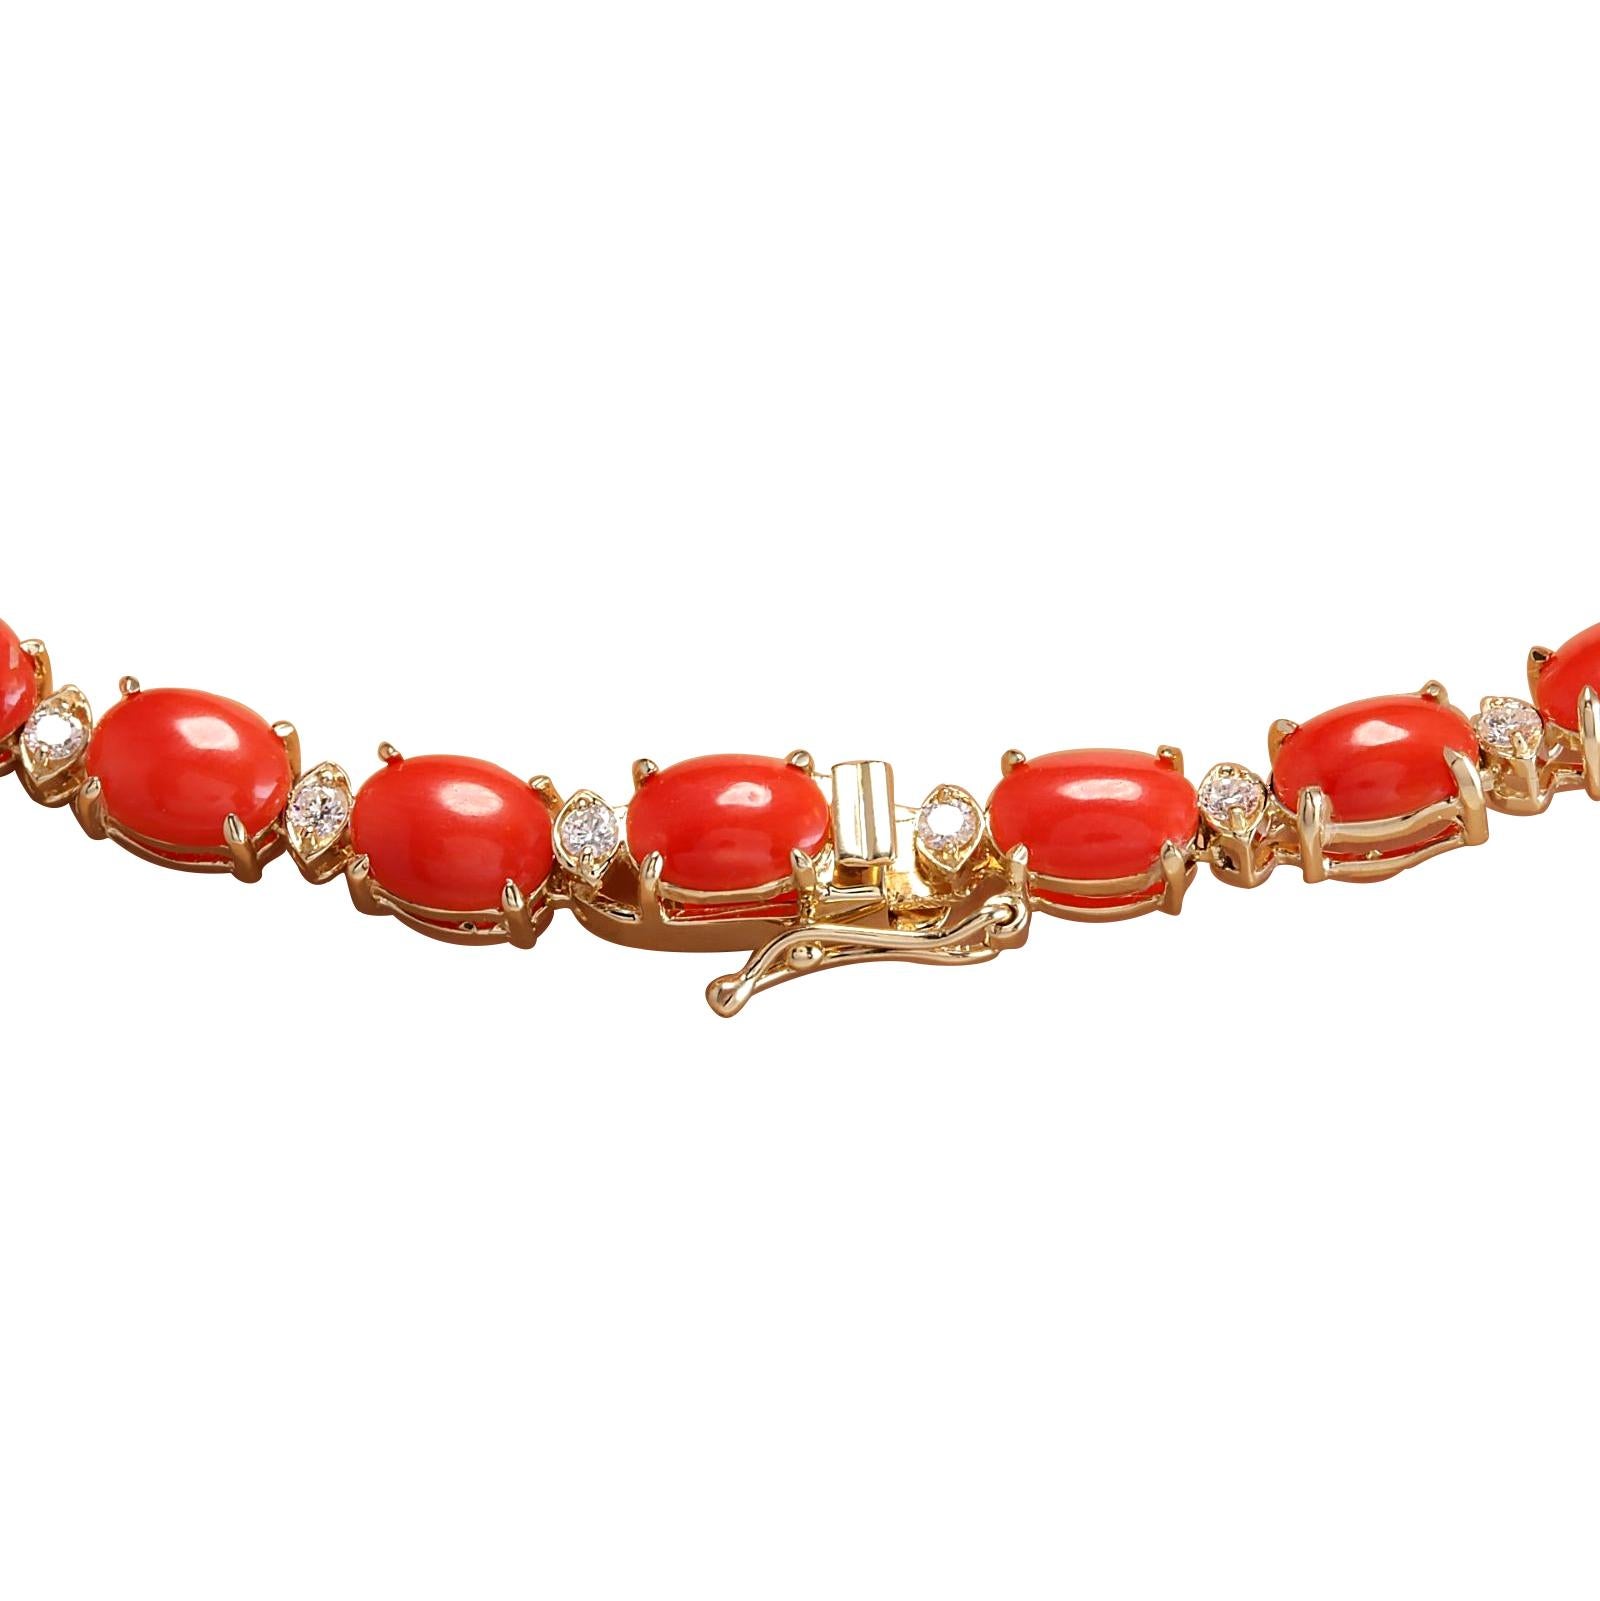 Stamped: 14K Yellow Gold
Total Necklace Weight: 34.0 Grams
Necklace Length: 17 Inches
Total Natural Coral Weight is 40.82 Carat (Measures: 6.00x4.00 mm)
Color: Red
Total Natural Diamond Weight is 2.00 Carat
Color: F-G, Clarity: VS2-SI1
Face